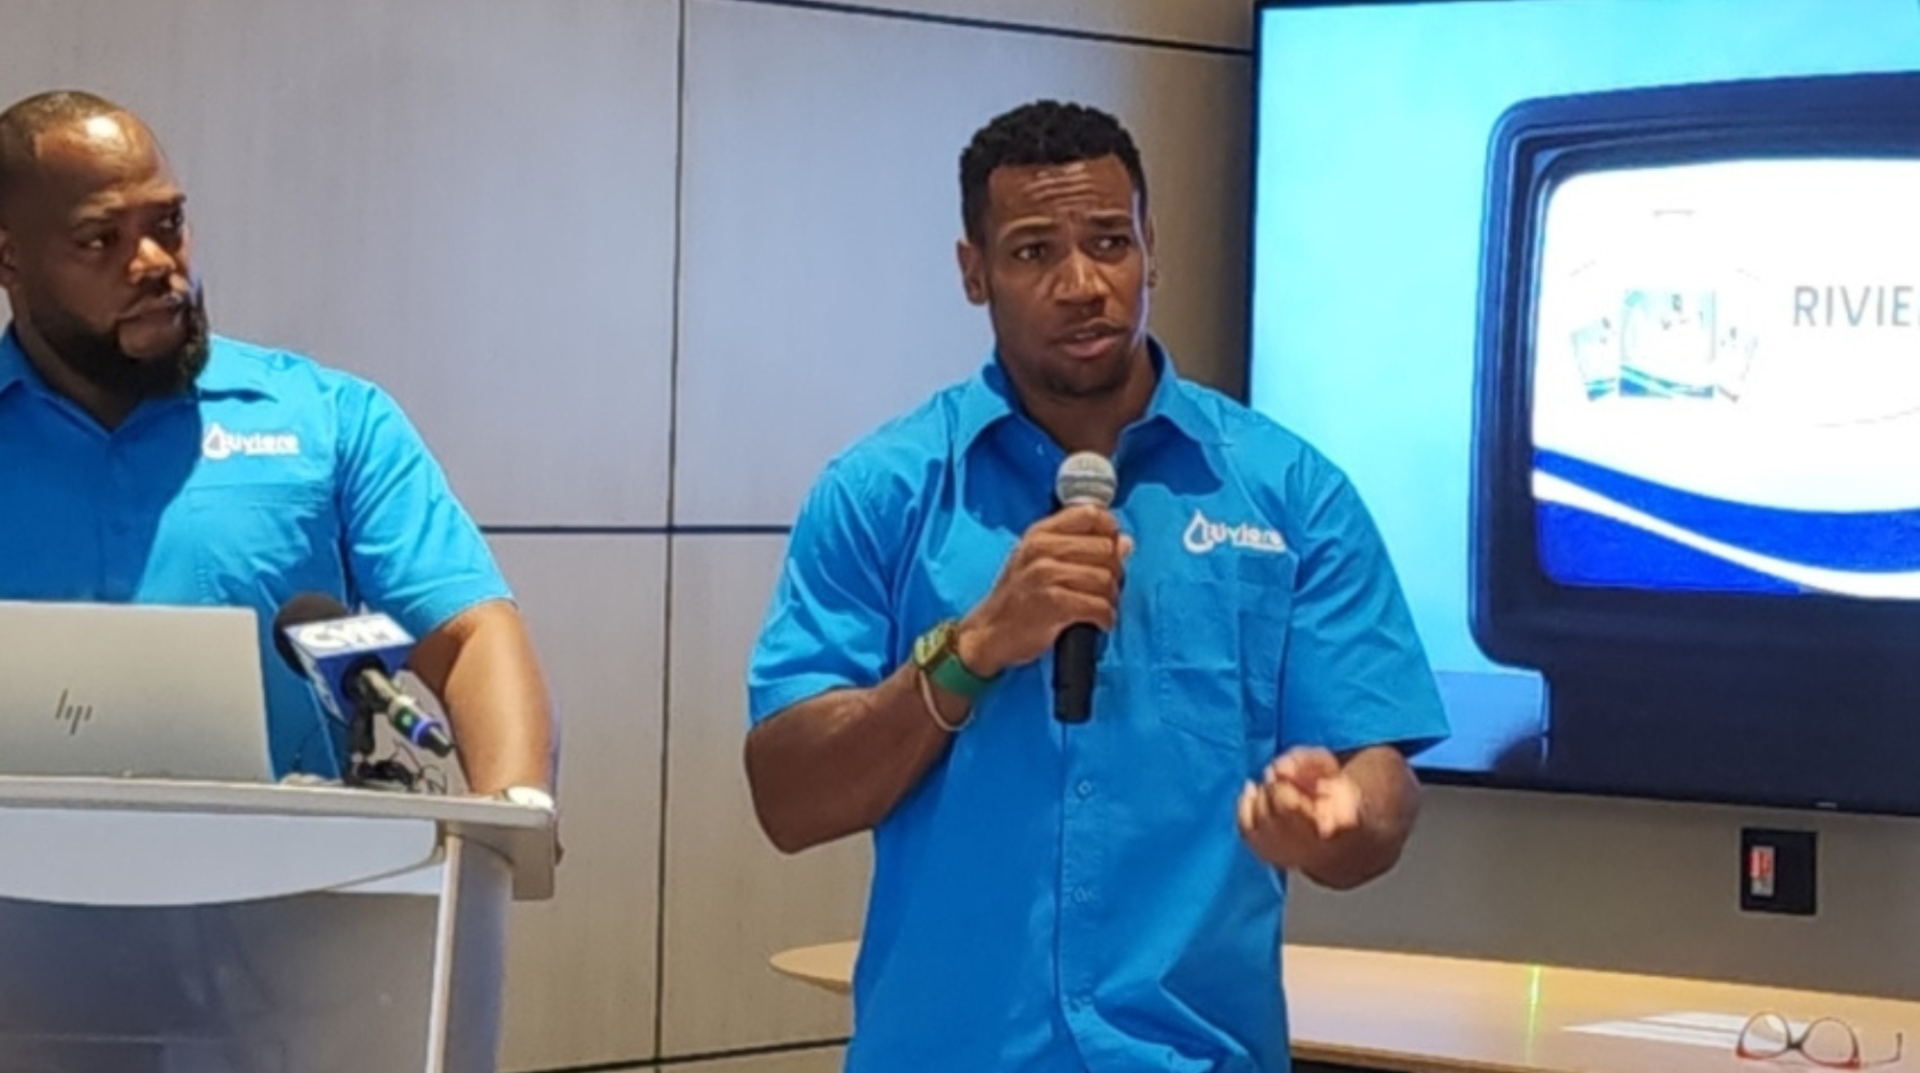 Yohan Blake launches Reviere Purified Water, Hailed as an Example for Others to Follow